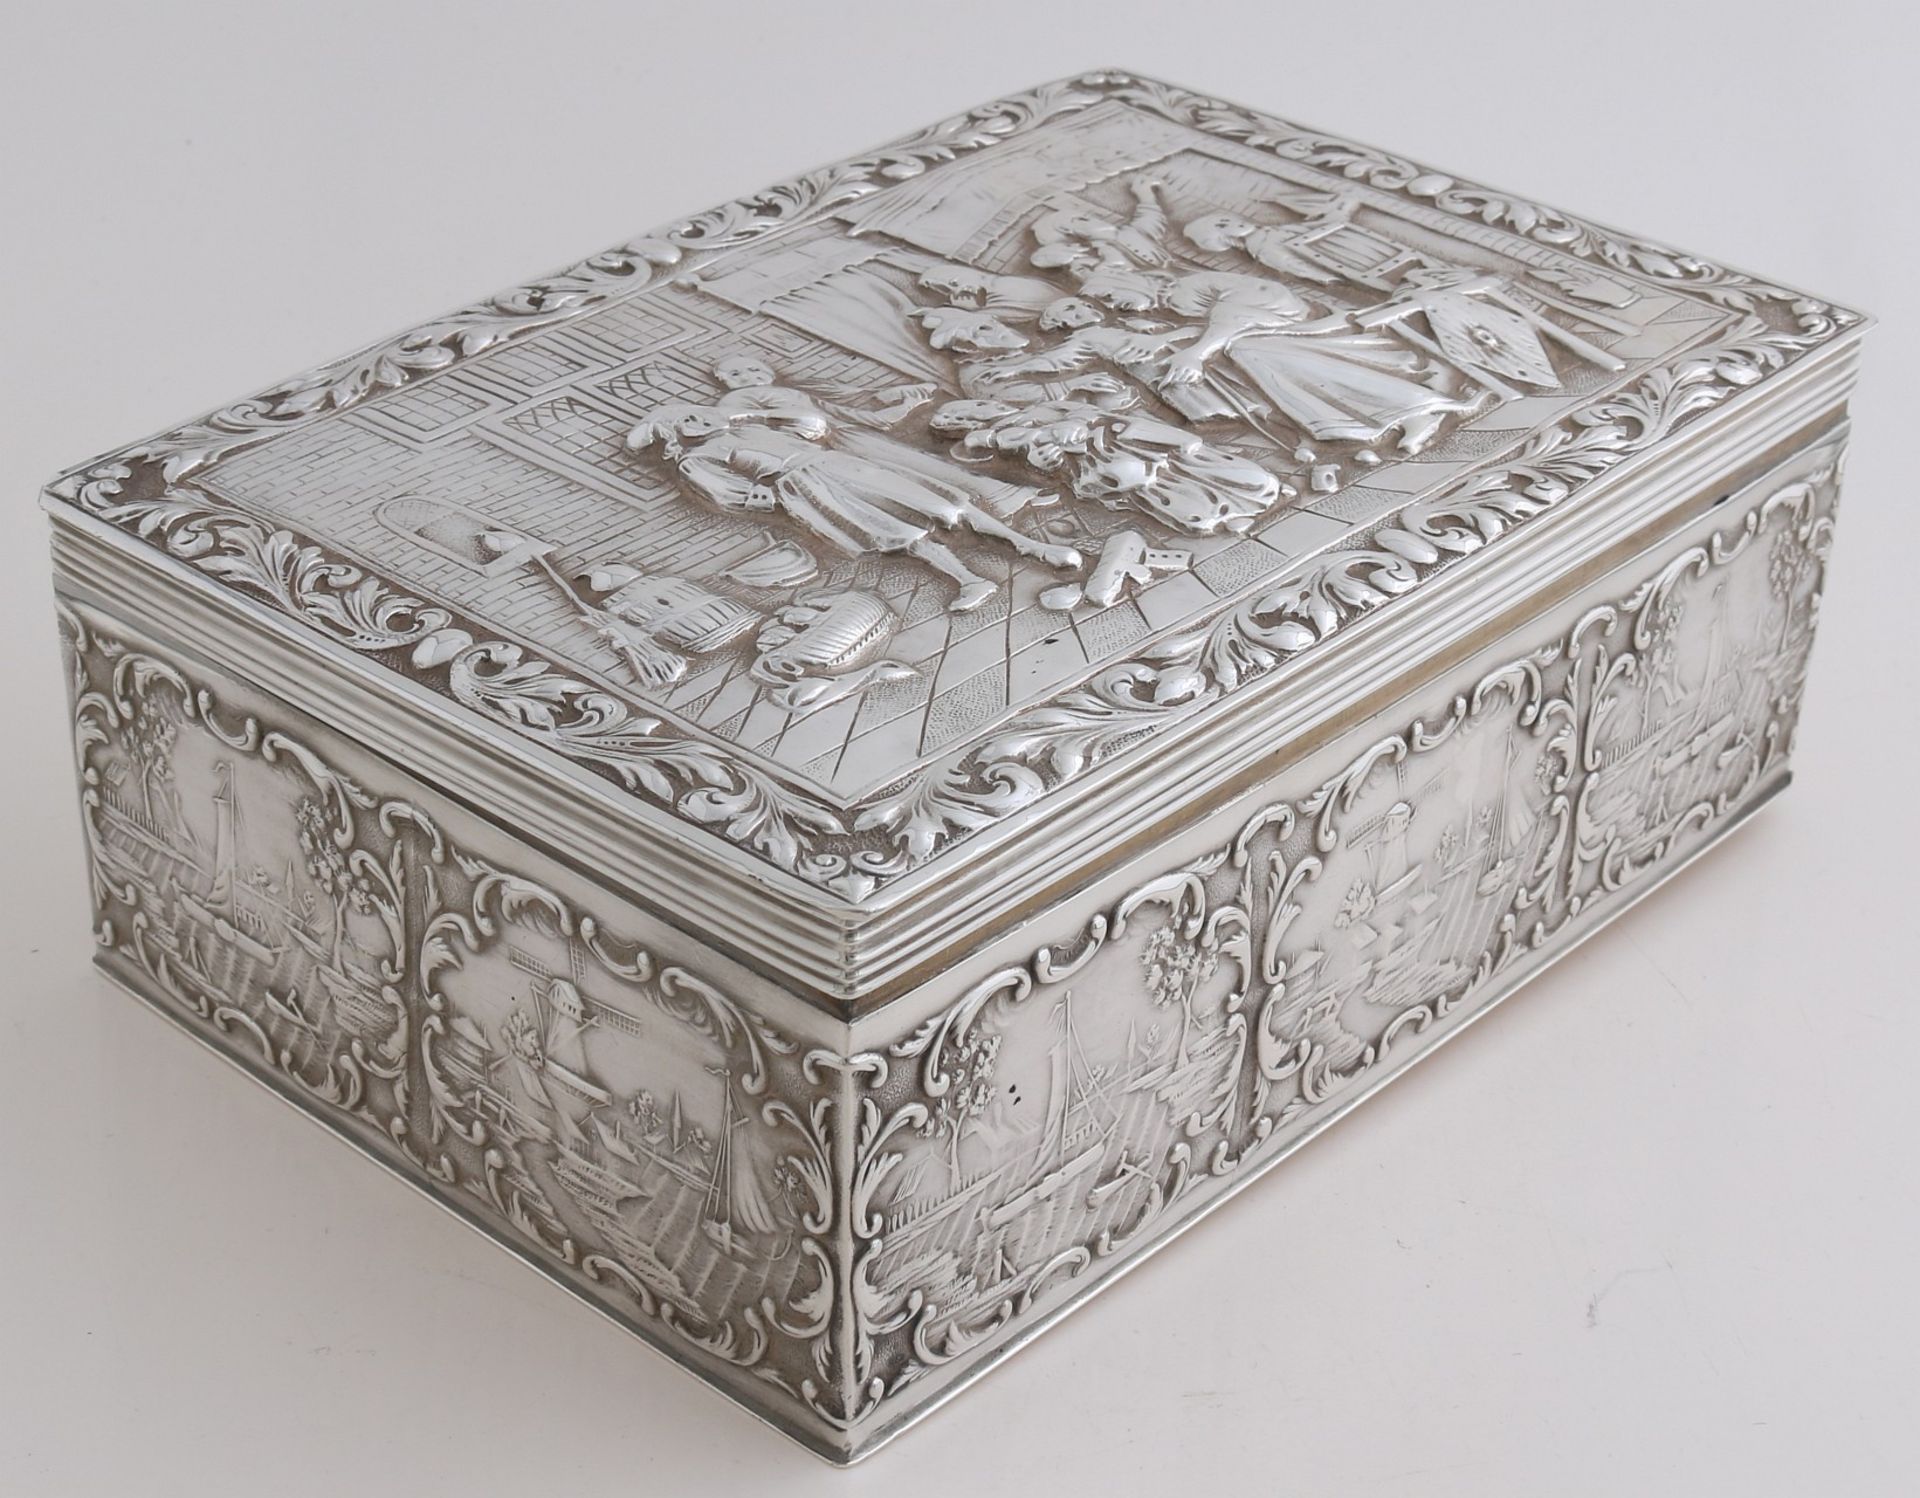 Silver biscuit tin - Image 3 of 3